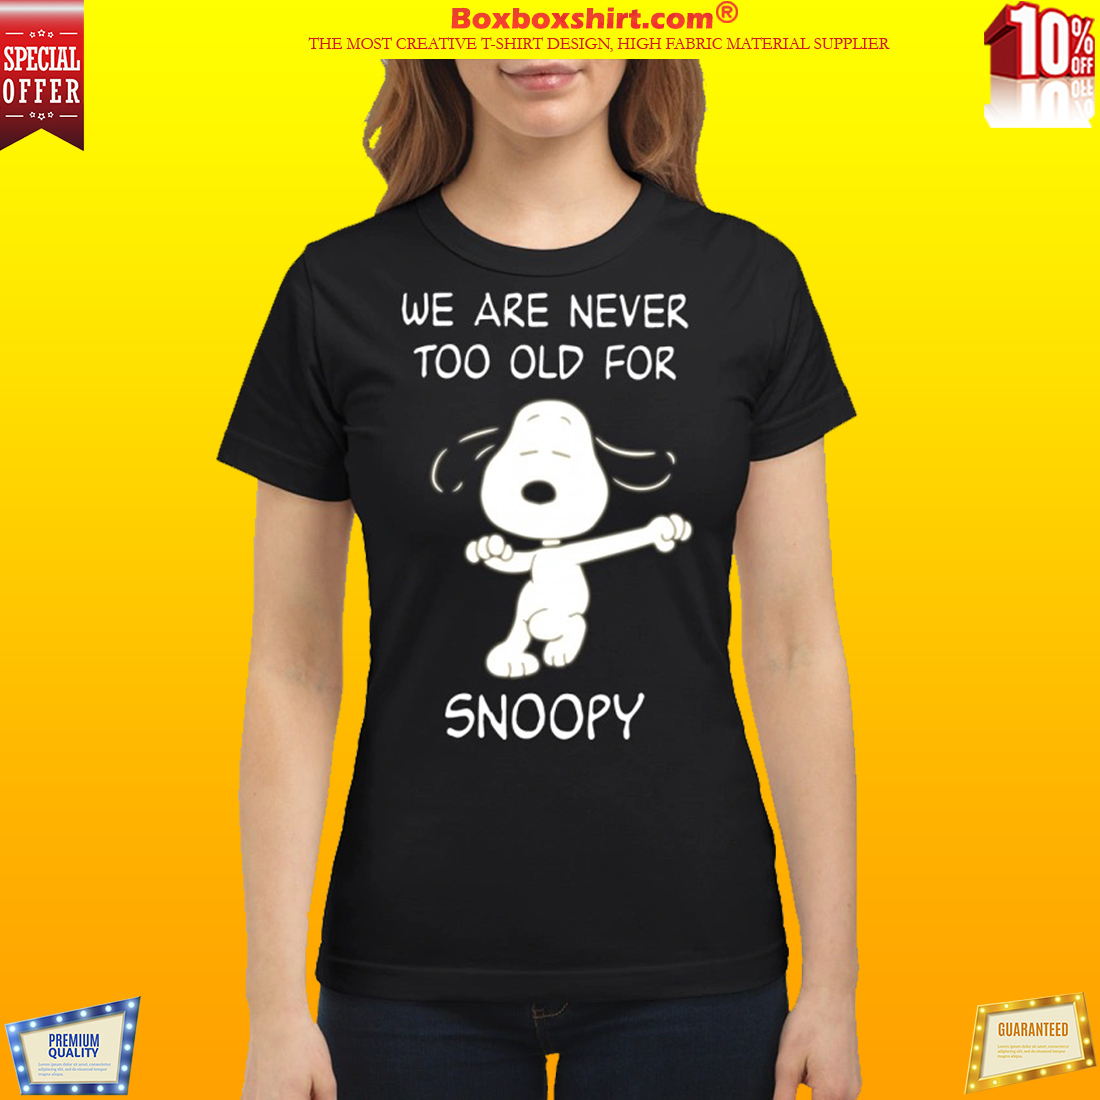 We are never too old for snoopy classic shirt